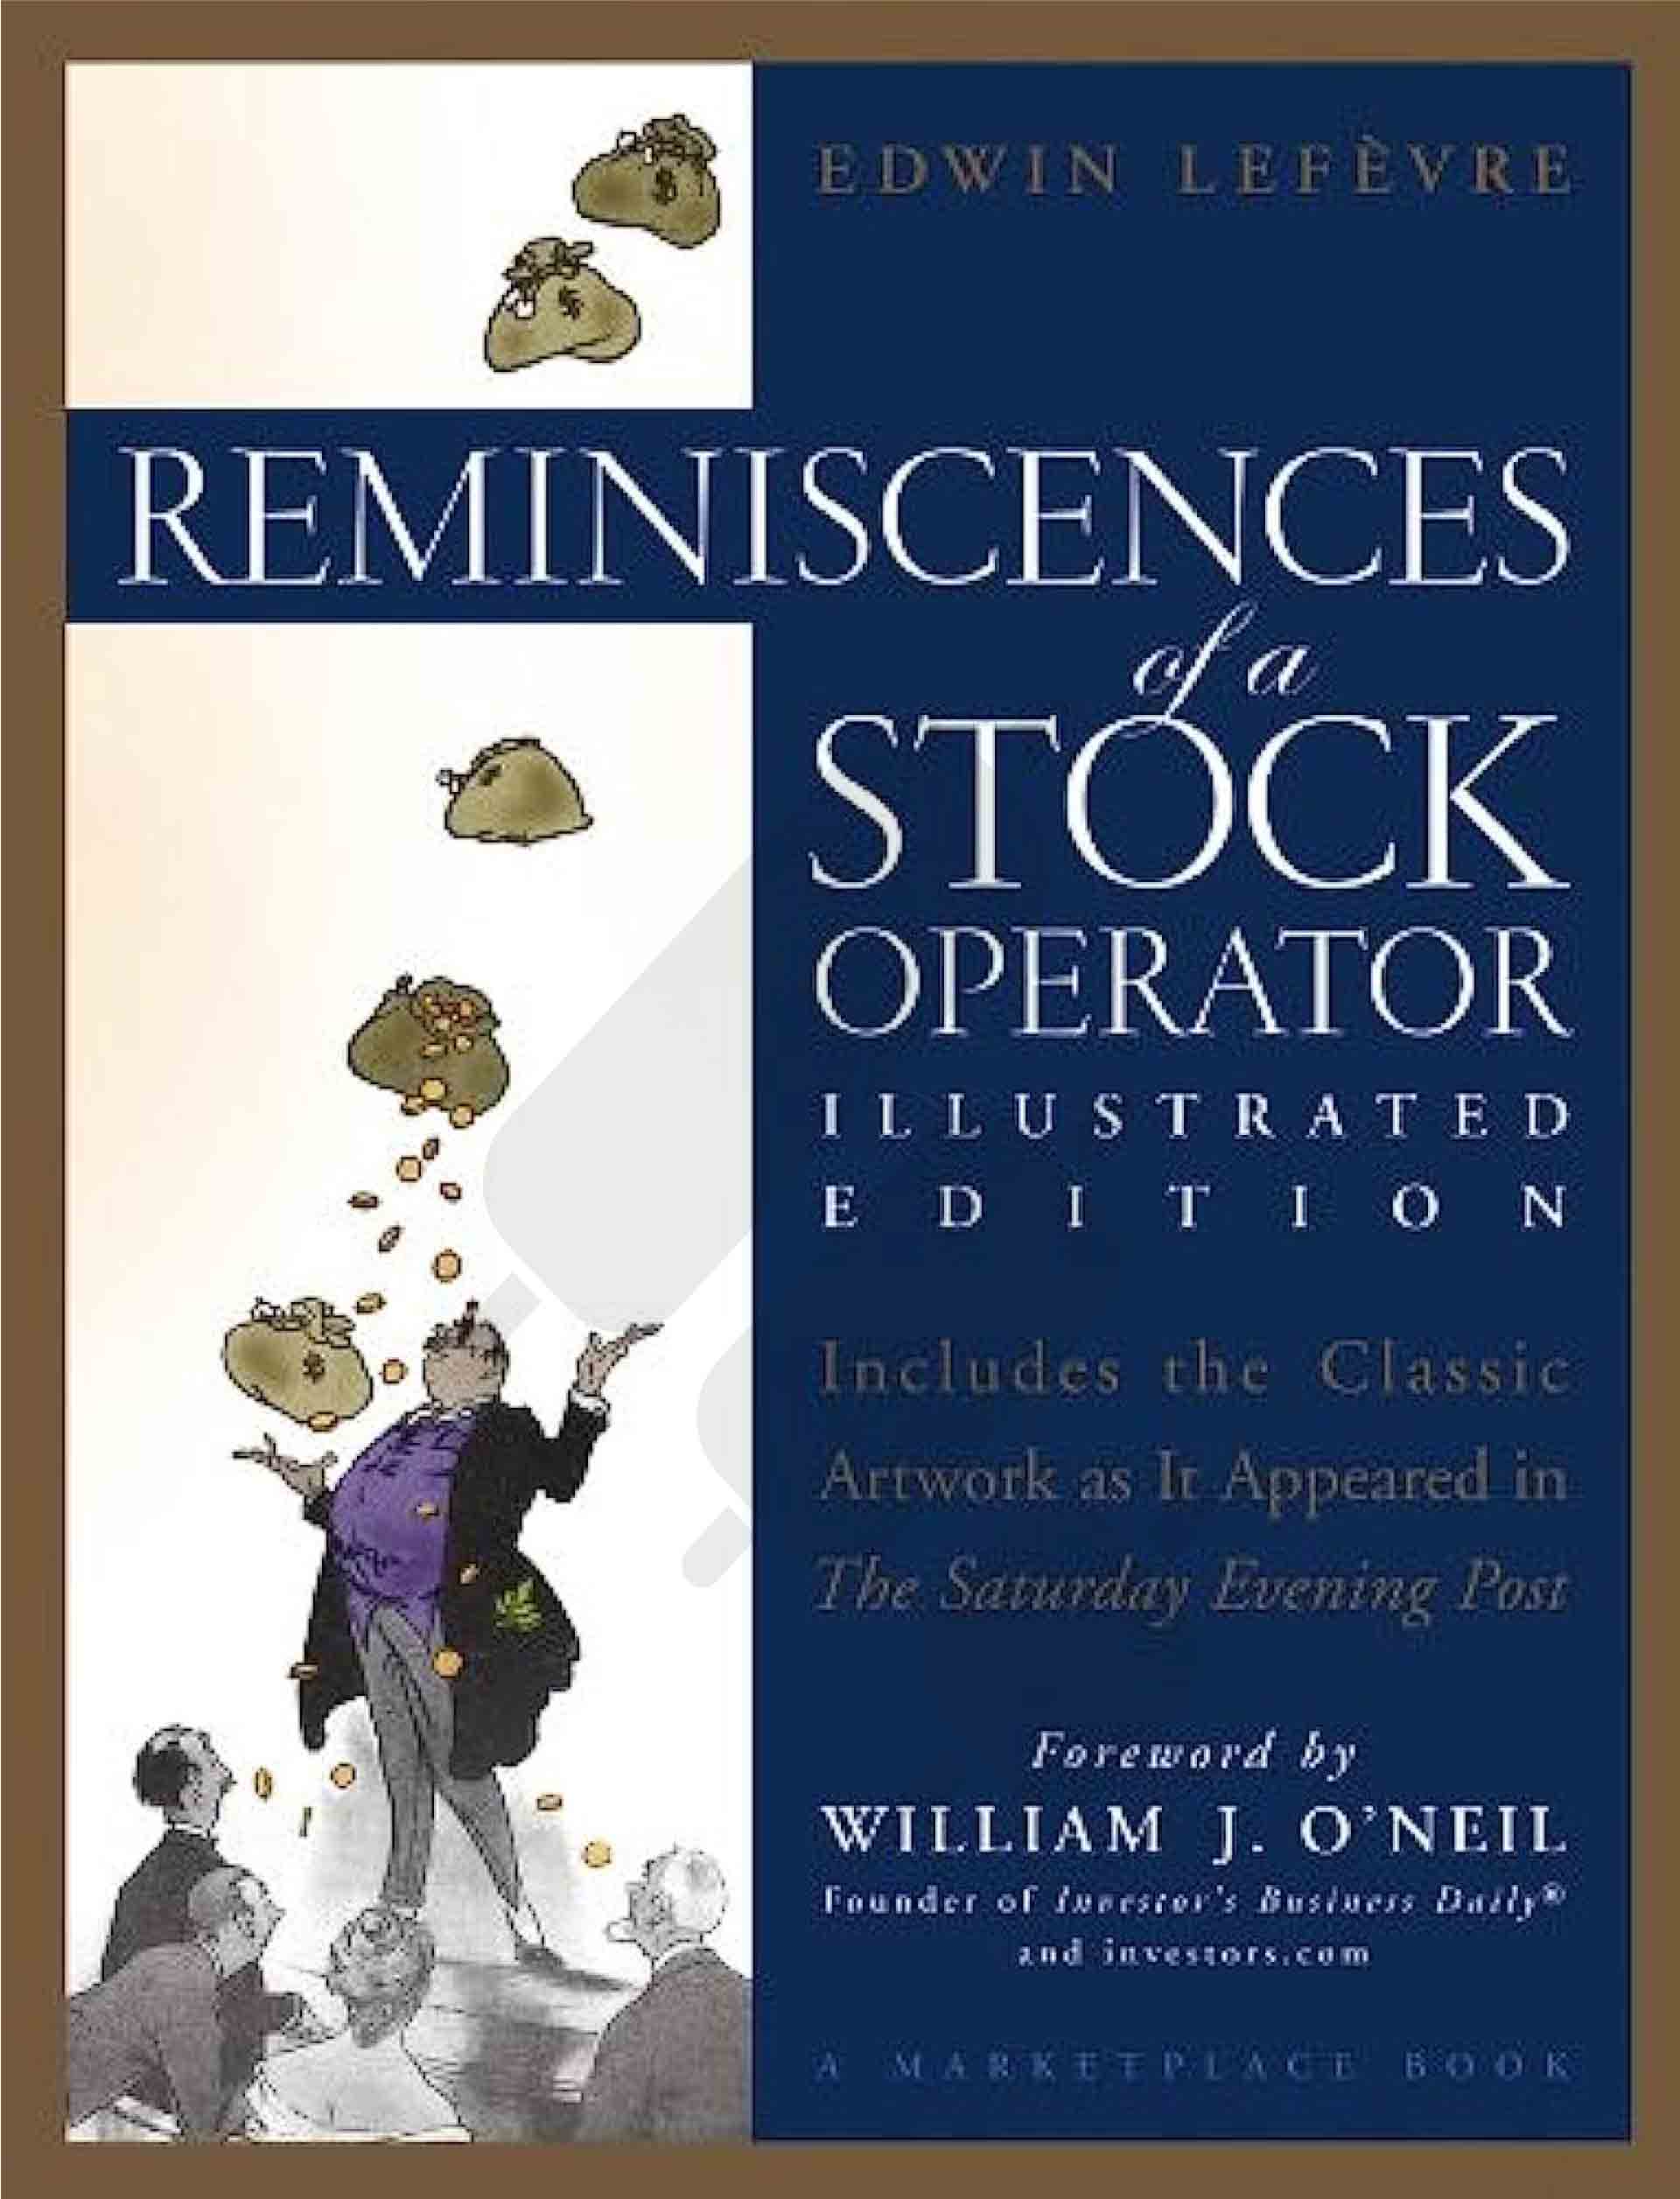 "Reminiscences of a Stock Operator" by Edwin Lefèvre (1923)